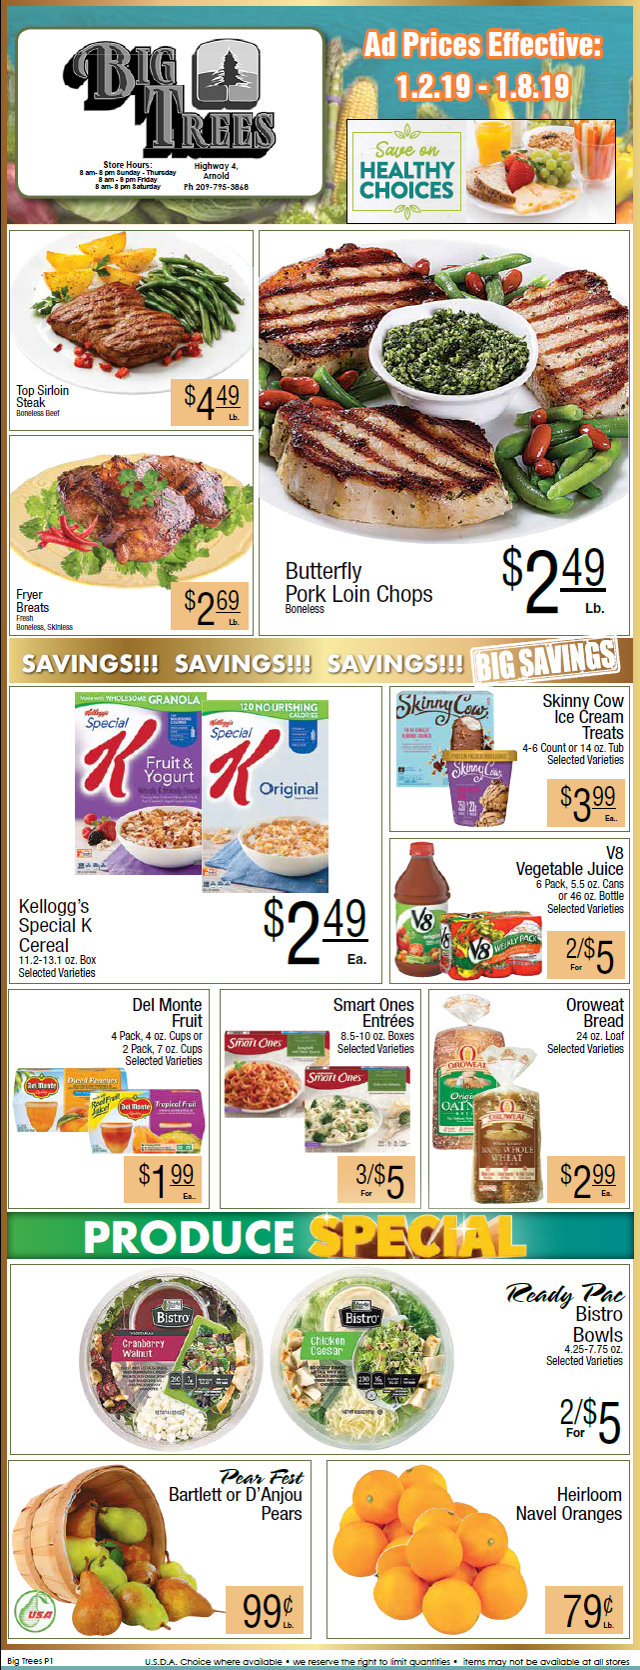 Start Your Year Off Right at Big Trees Market!  Weekly Ad & Grocery Specials Through January 8